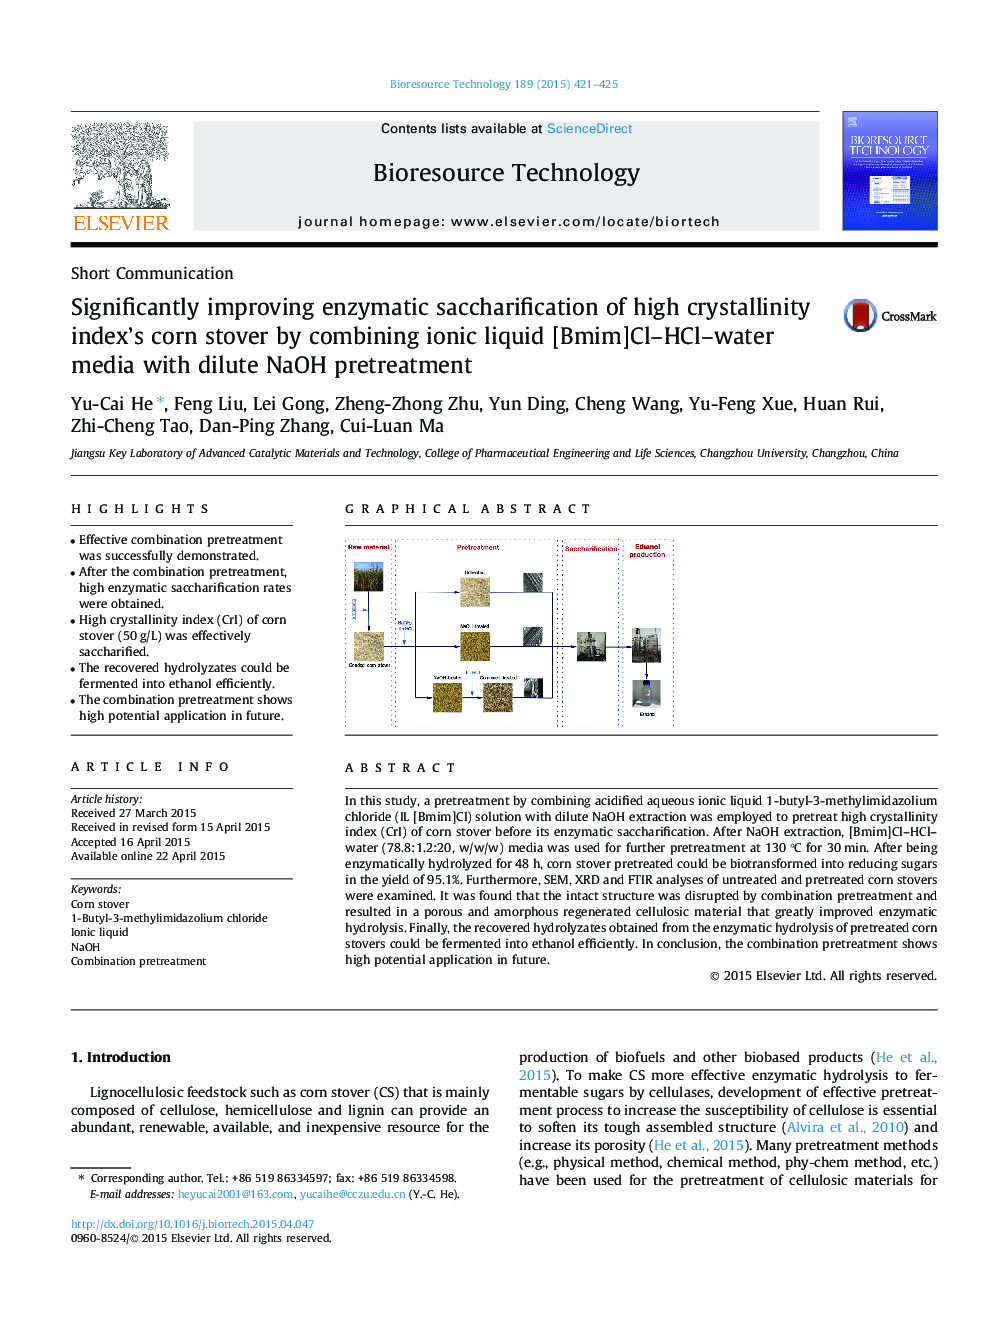 Significantly improving enzymatic saccharification of high crystallinity index’s corn stover by combining ionic liquid [Bmim]Cl–HCl–water media with dilute NaOH pretreatment